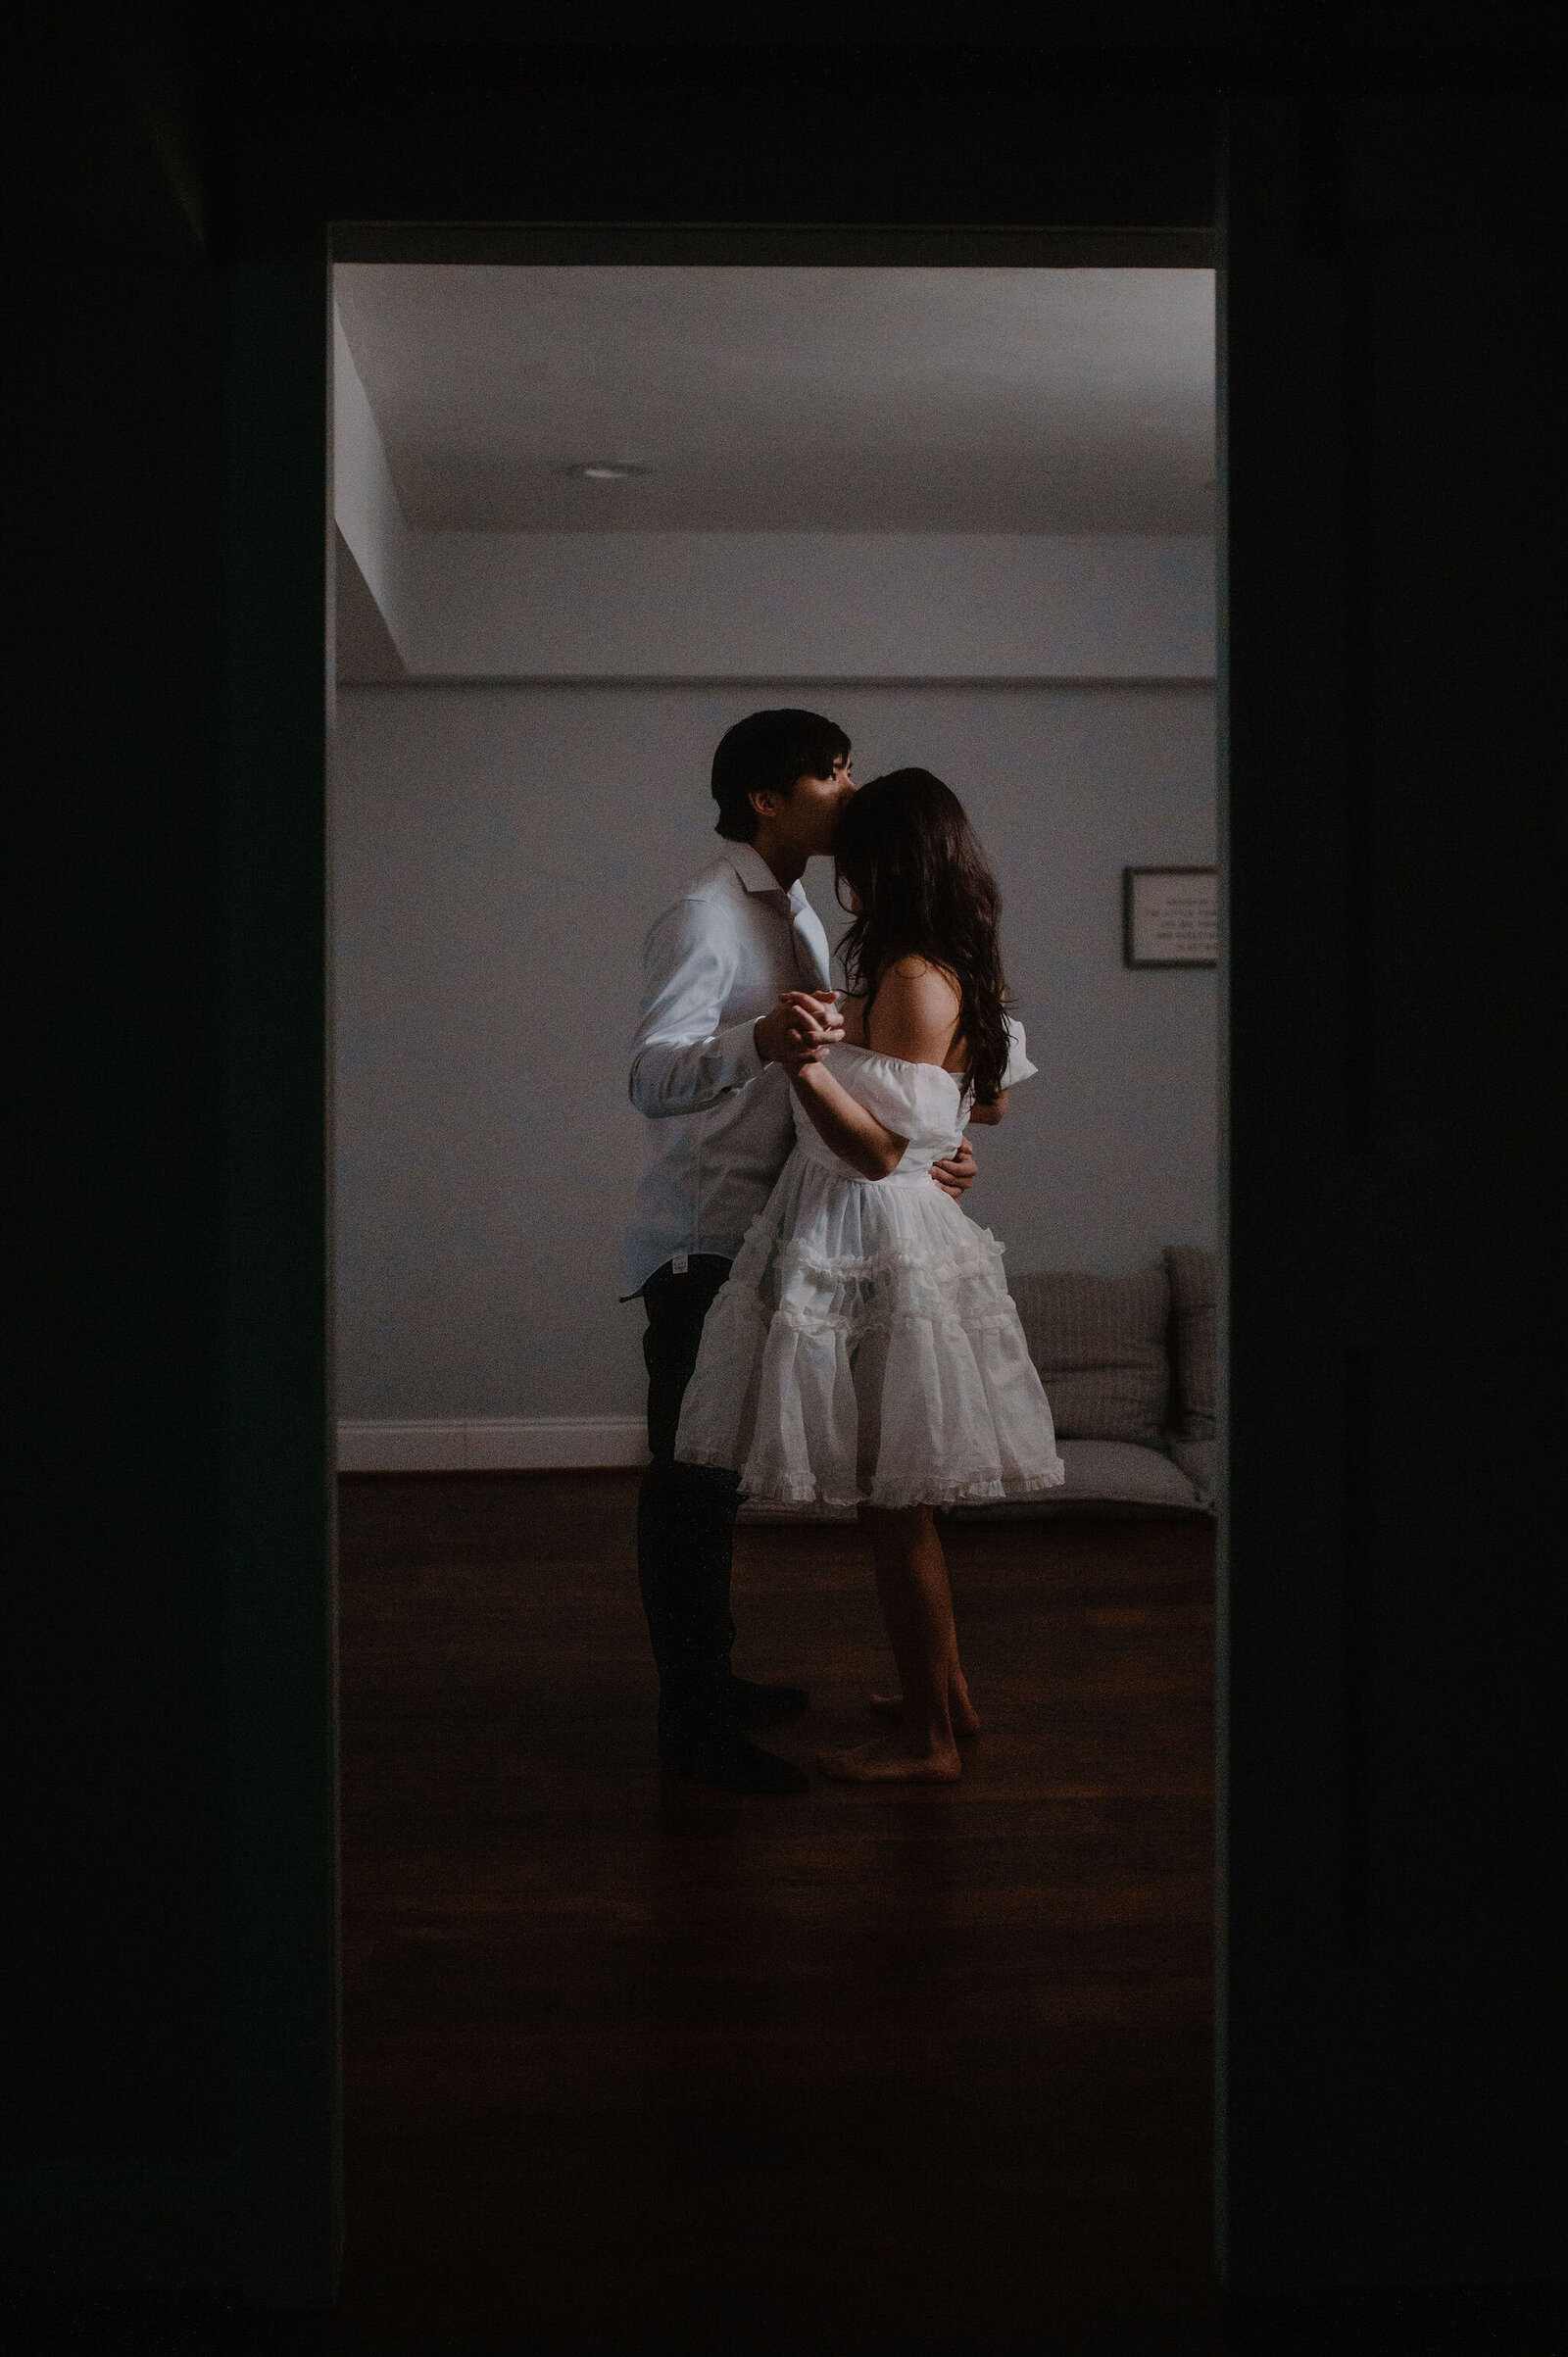 couple dancing barefoot in their home, single window lighting them